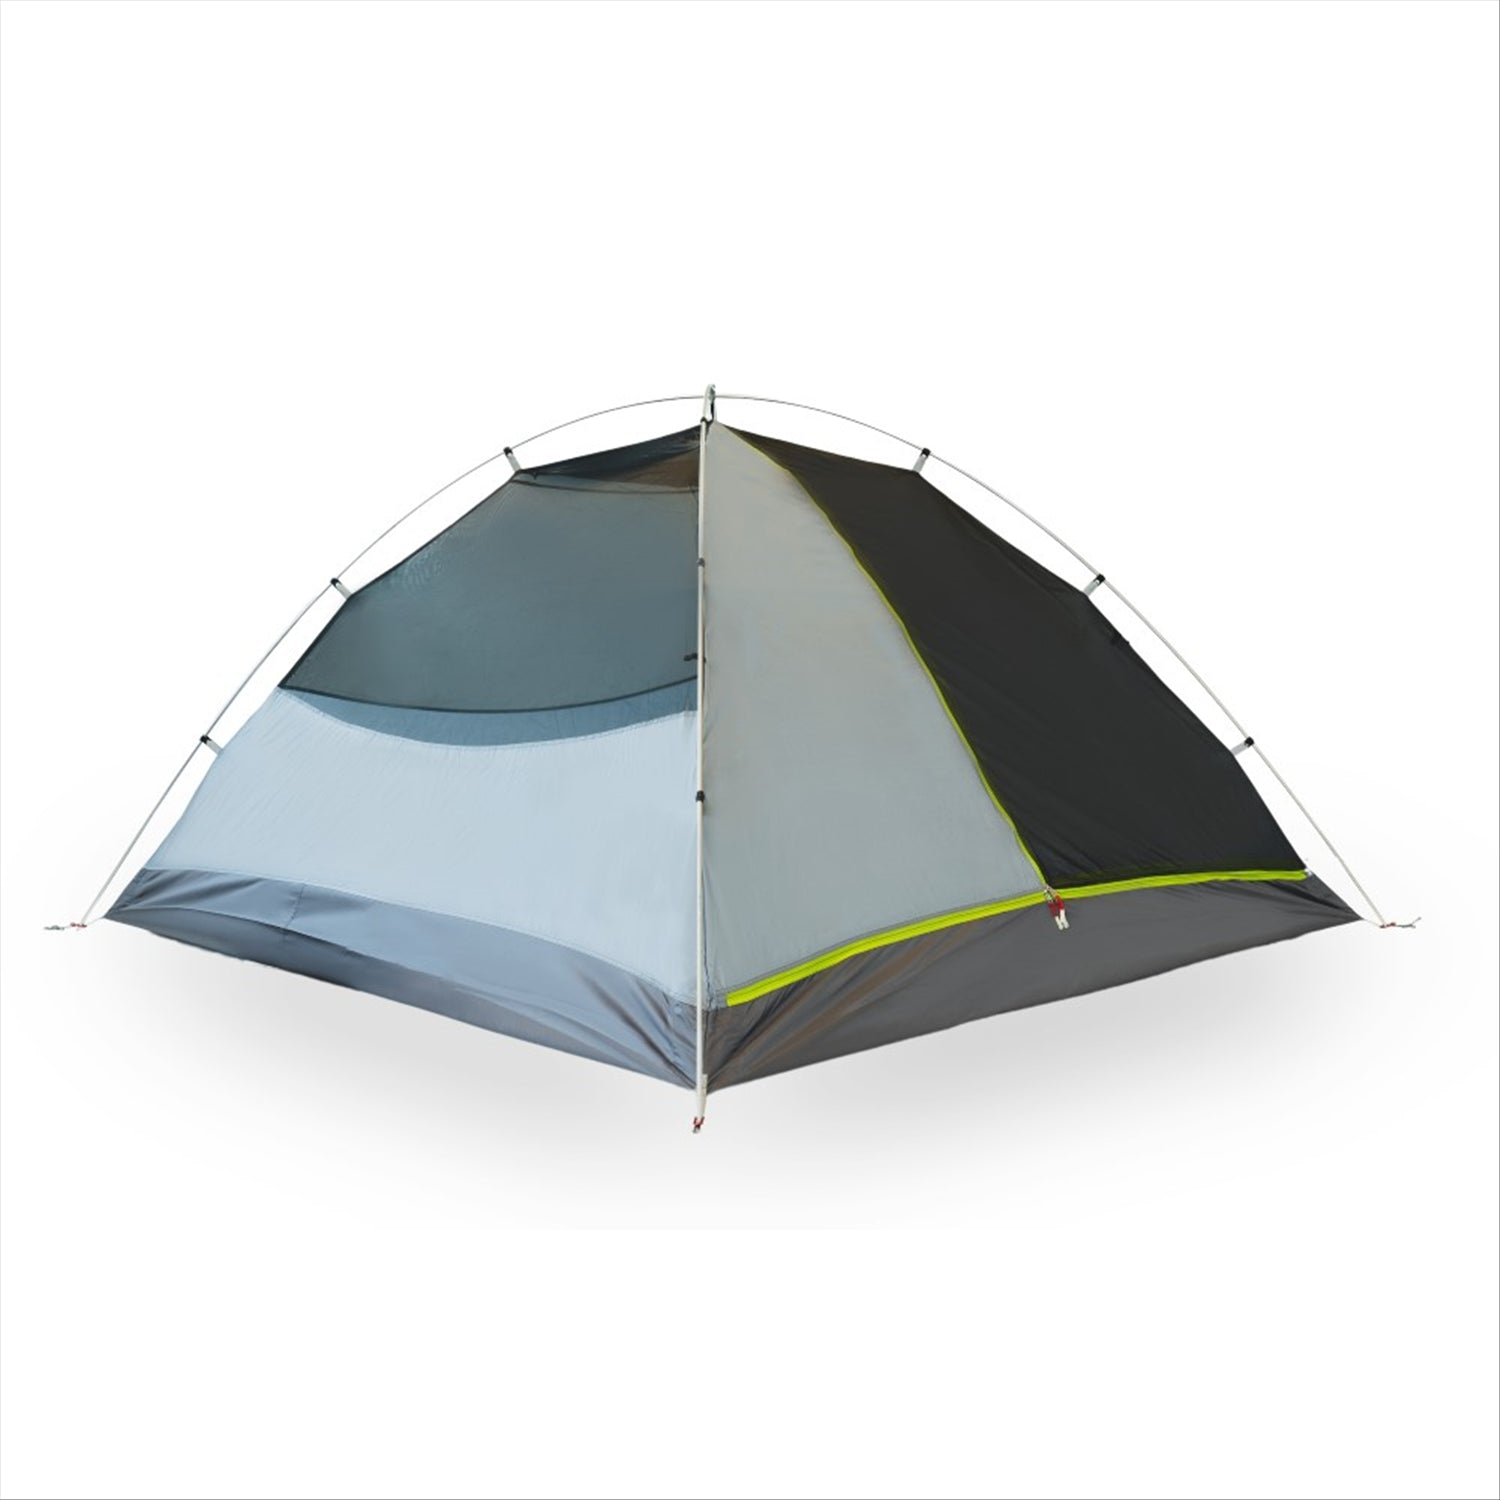 Nomad 3 'All Weather' Series 3-4 Person Tent, 3.3kg